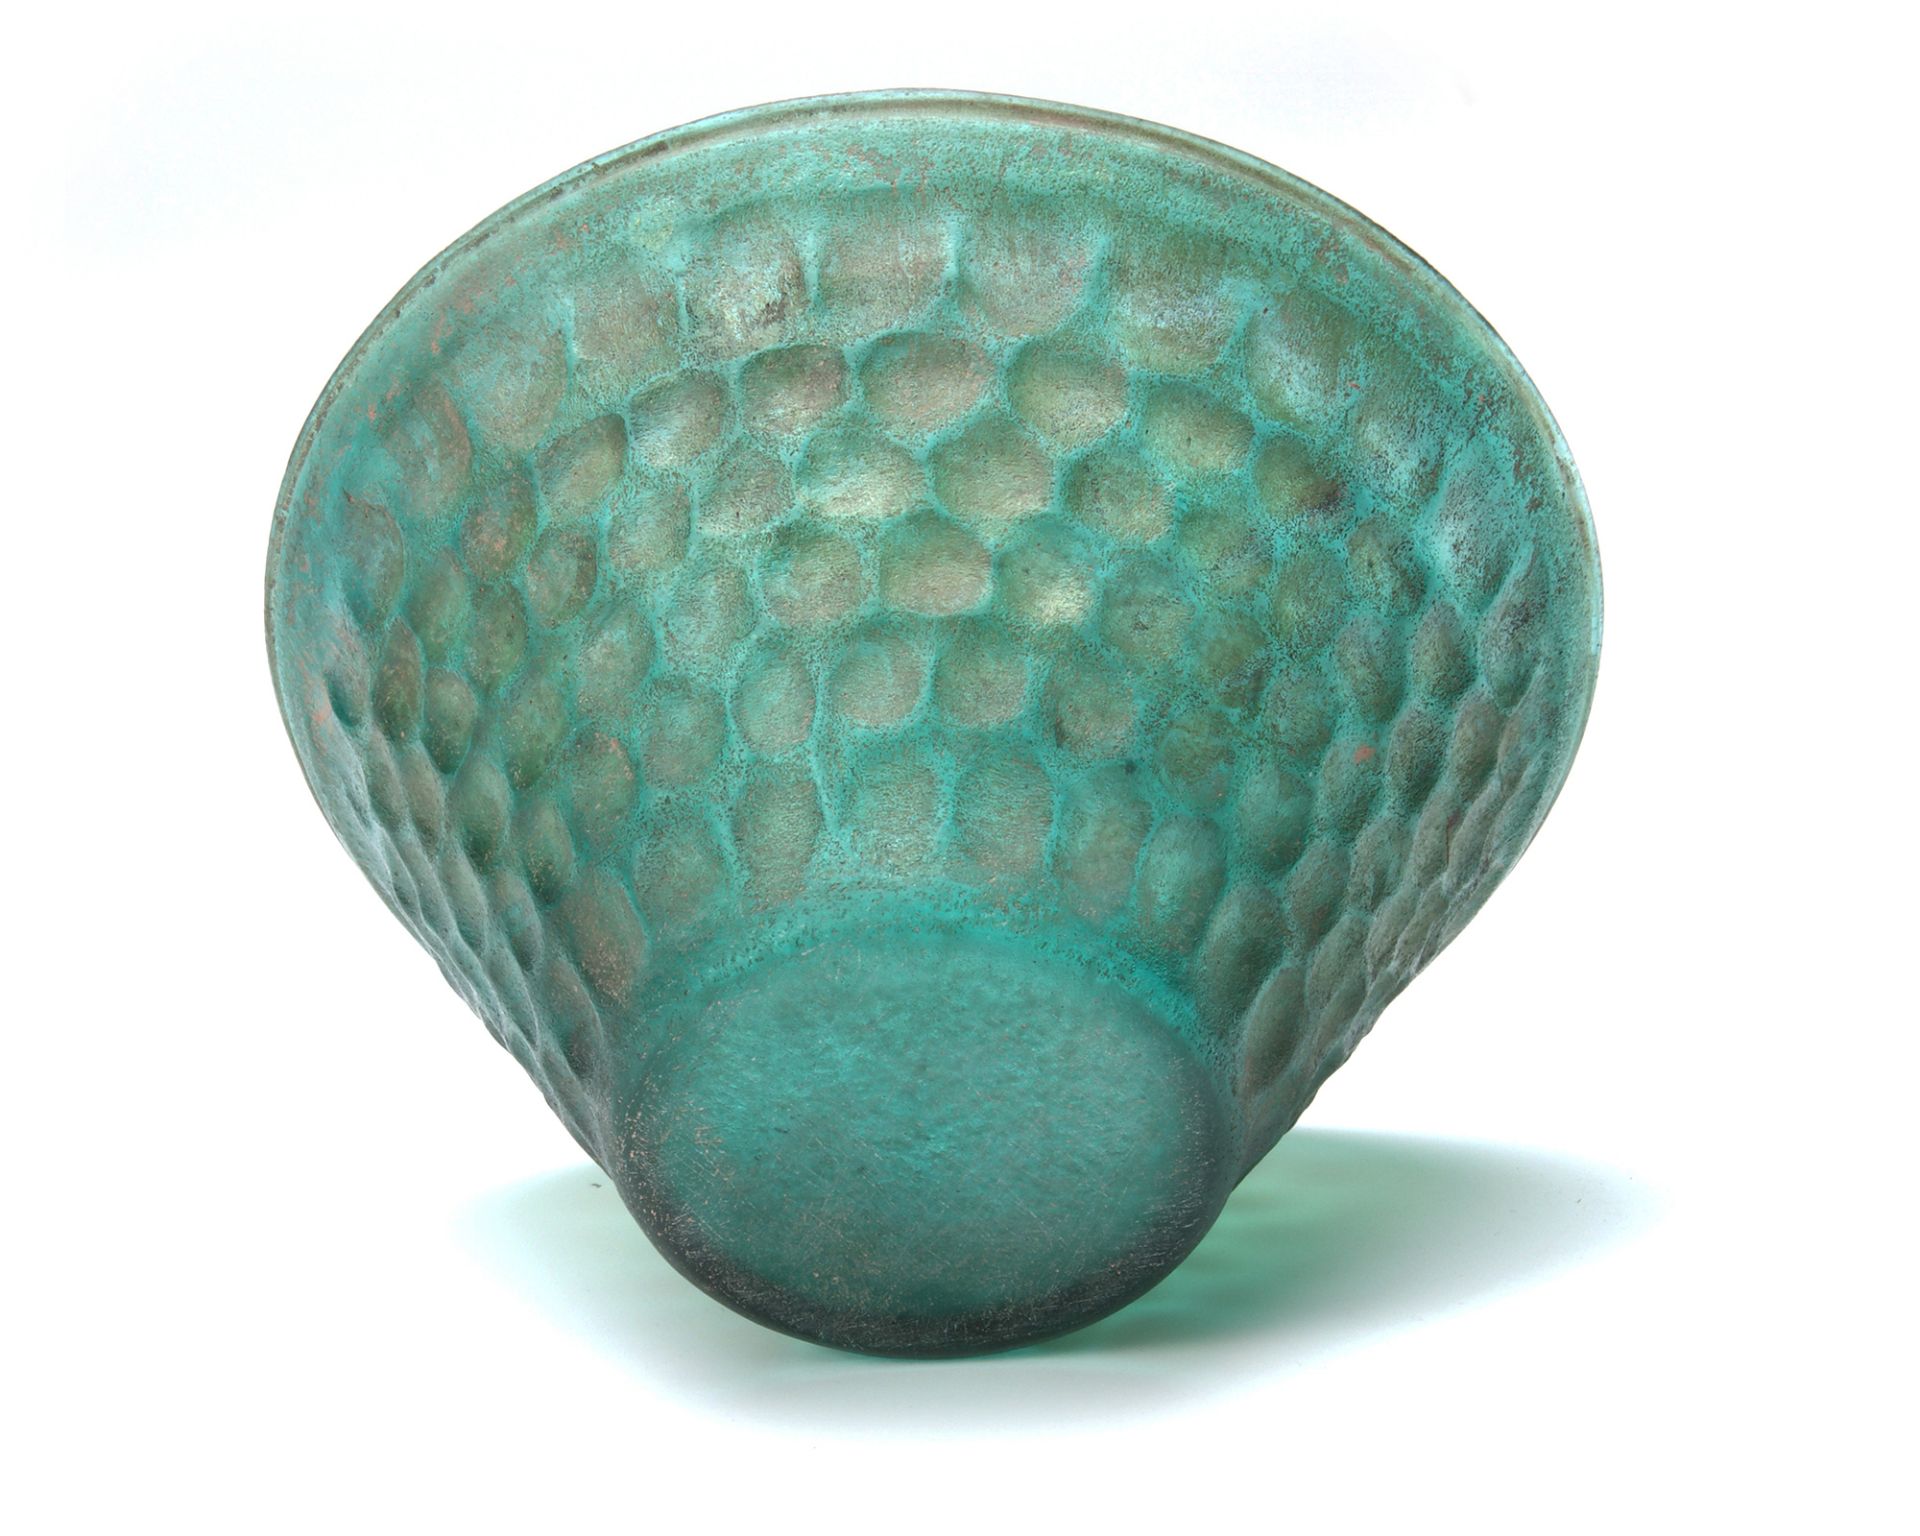 A PERSIAN GREEN CUT GLASS BOWL, 8TH-9TH CENTURY - Image 6 of 10